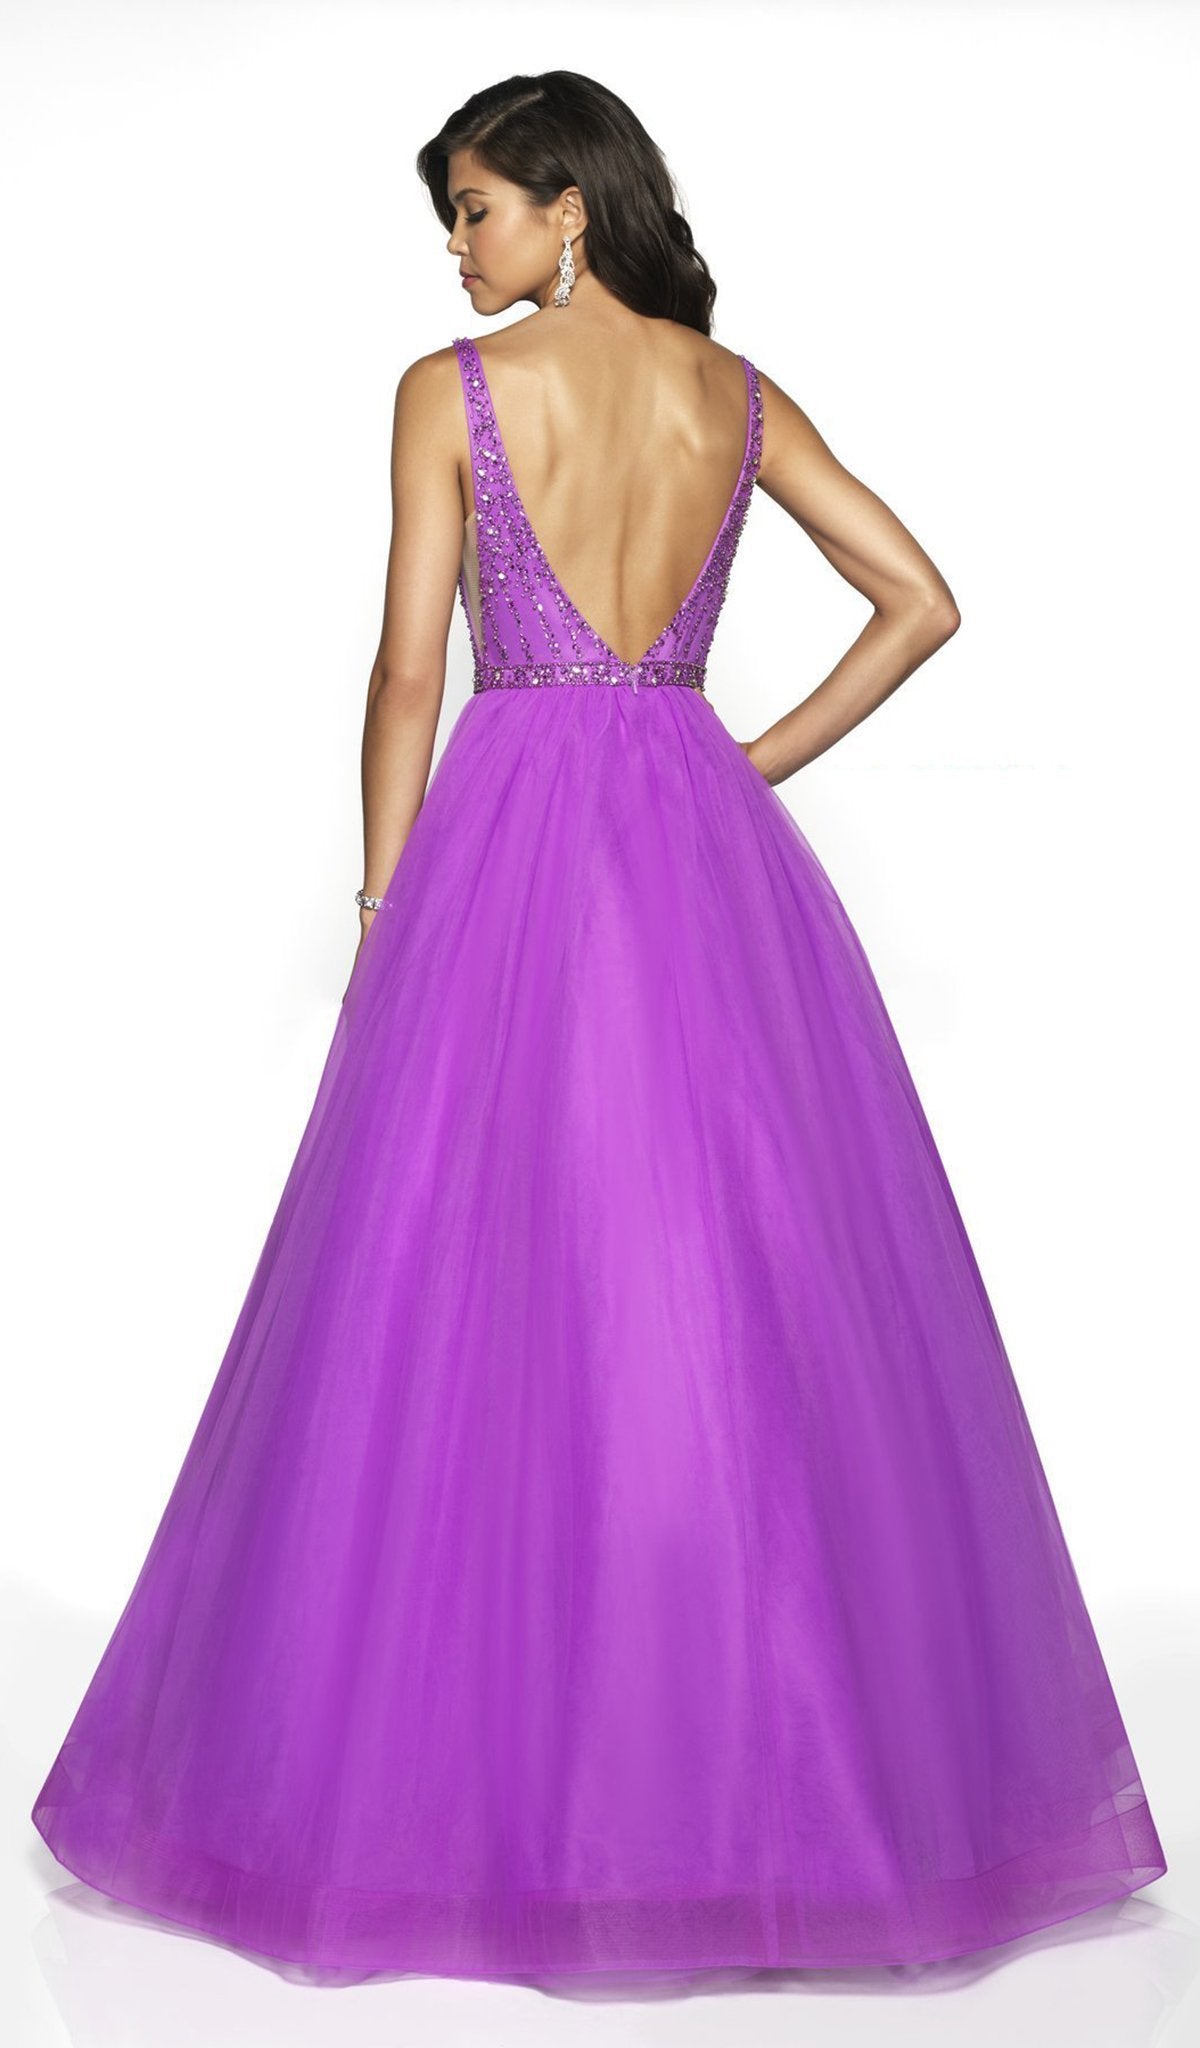 Blush by Alexia Designs - 5707 Beaded Deep V-neck Tulle Ballgown In Purple